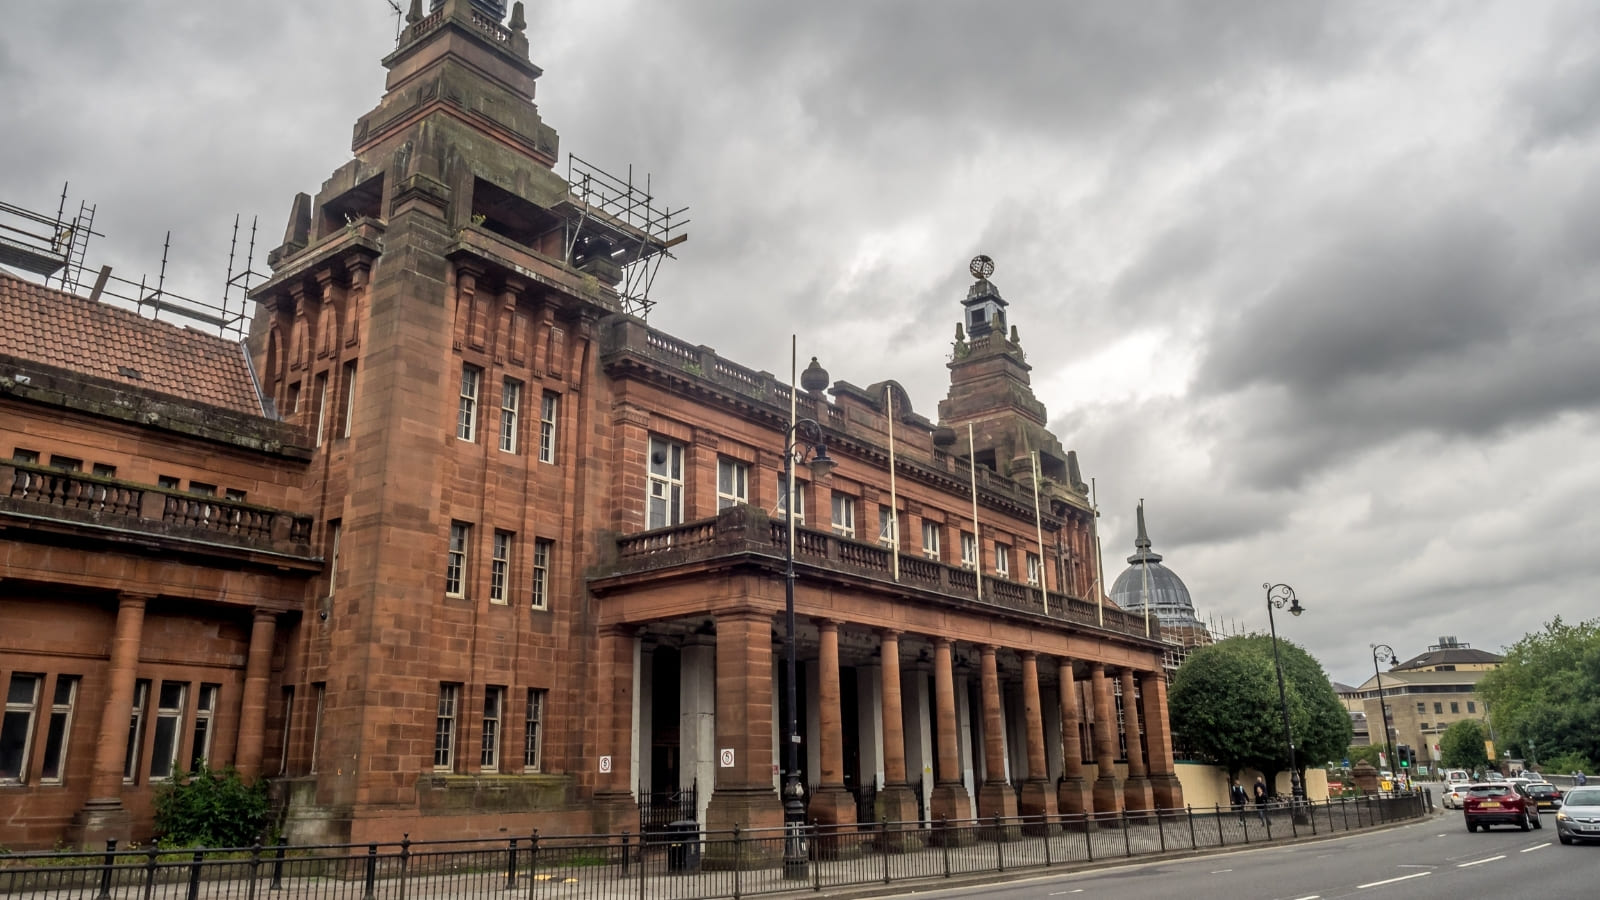 Exterior of large red building, Kelvin Hall